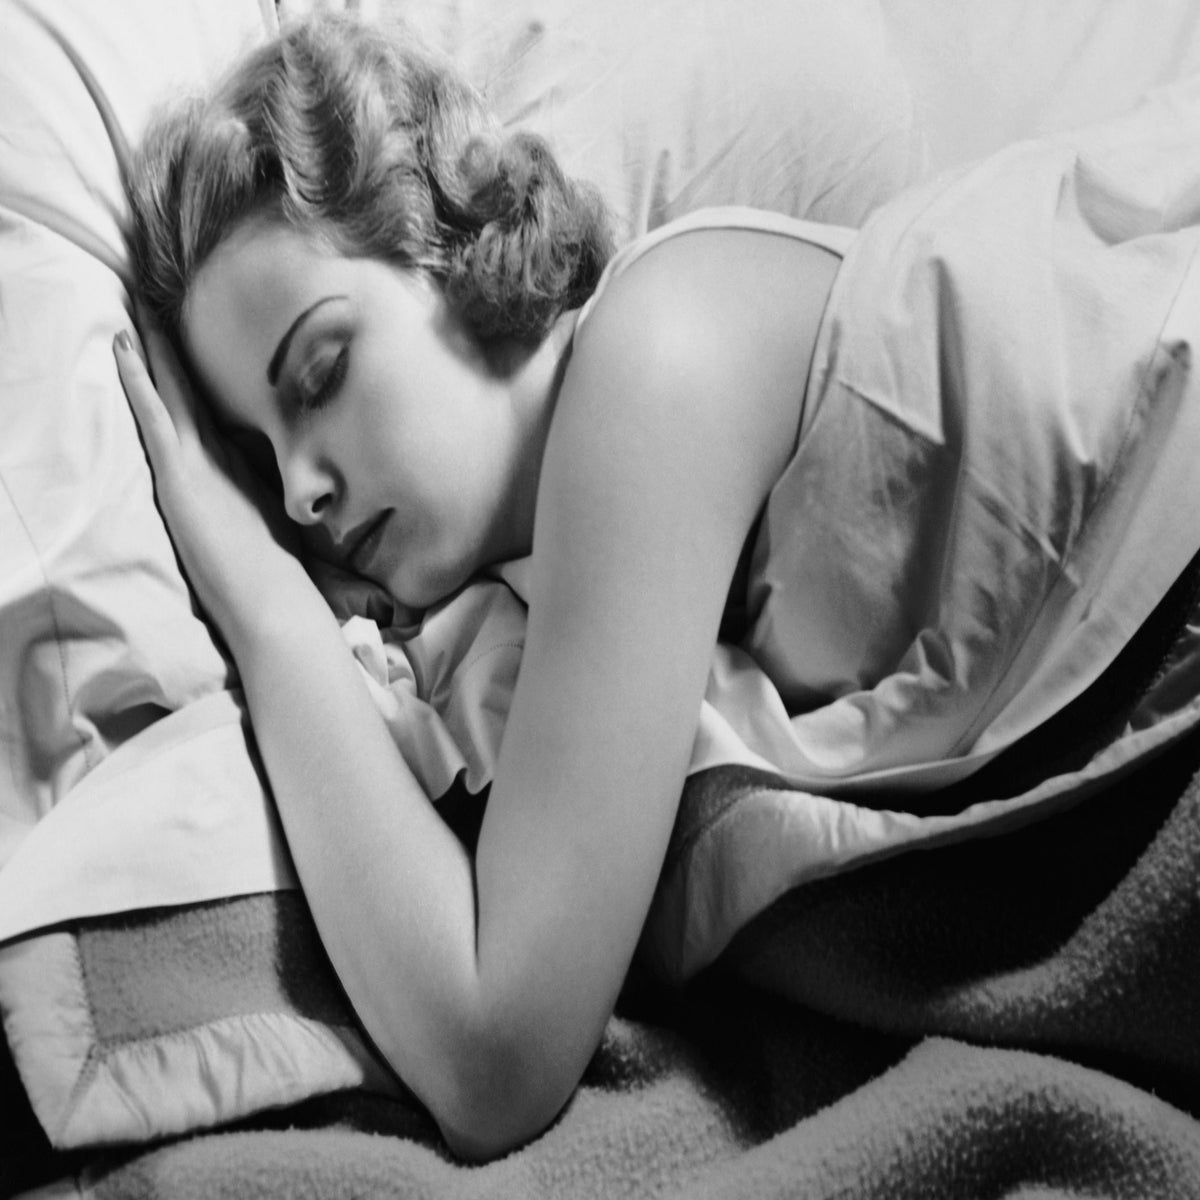 Reduce The Risk: Check The Room Temperature When I'm Asleep - Safe Sleep  Scotland